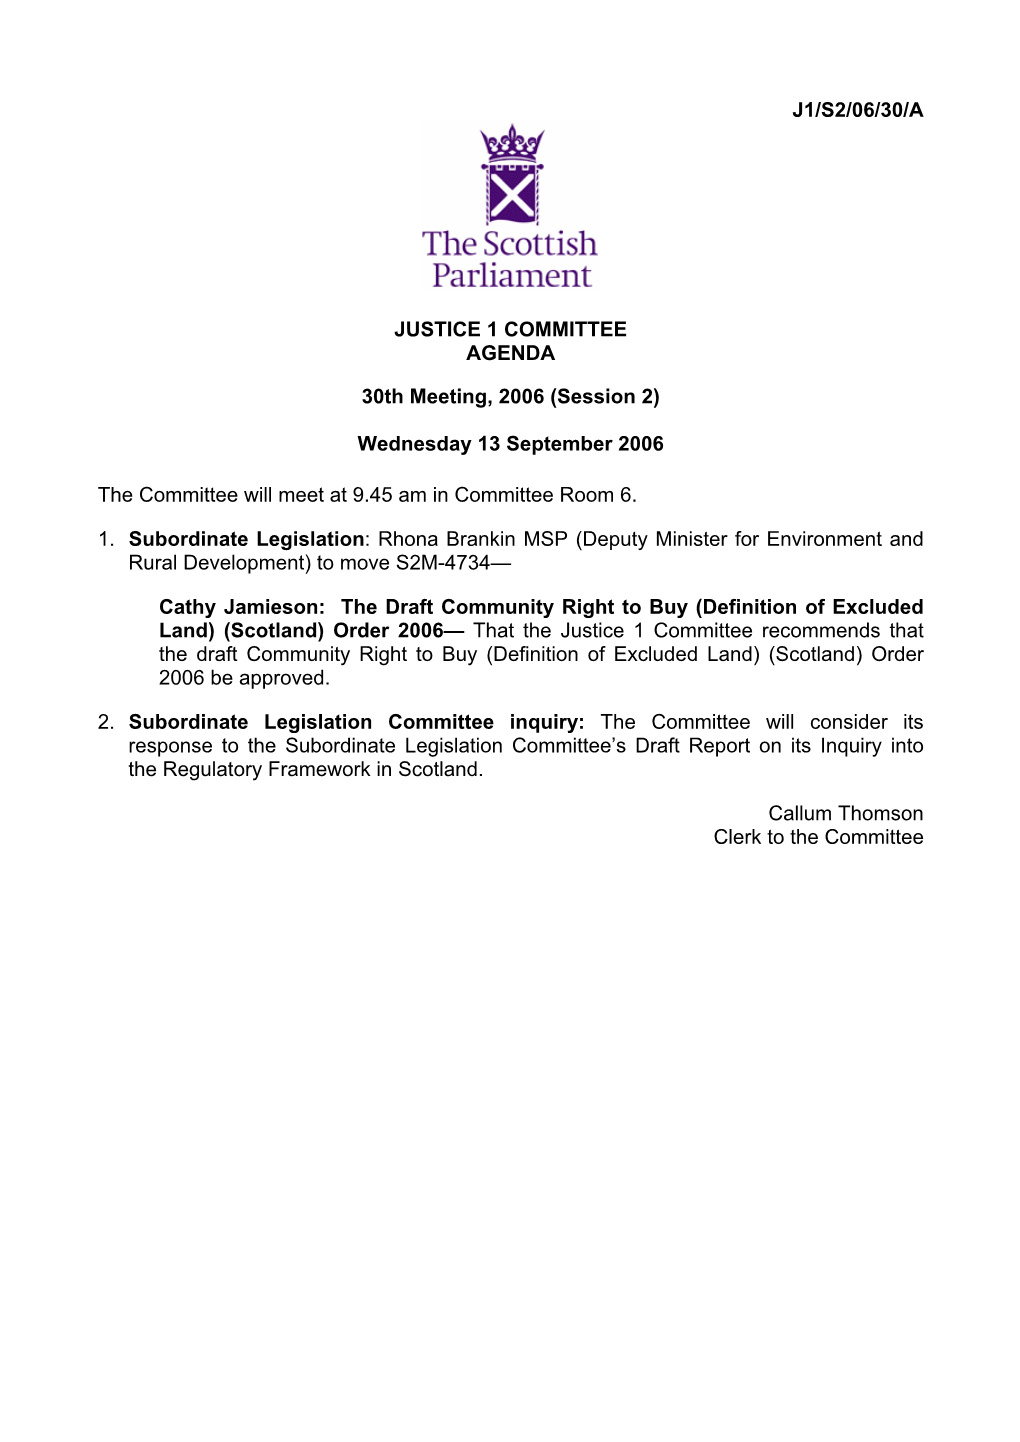 J1/S2/06/30/A JUSTICE 1 COMMITTEE AGENDA 30Th